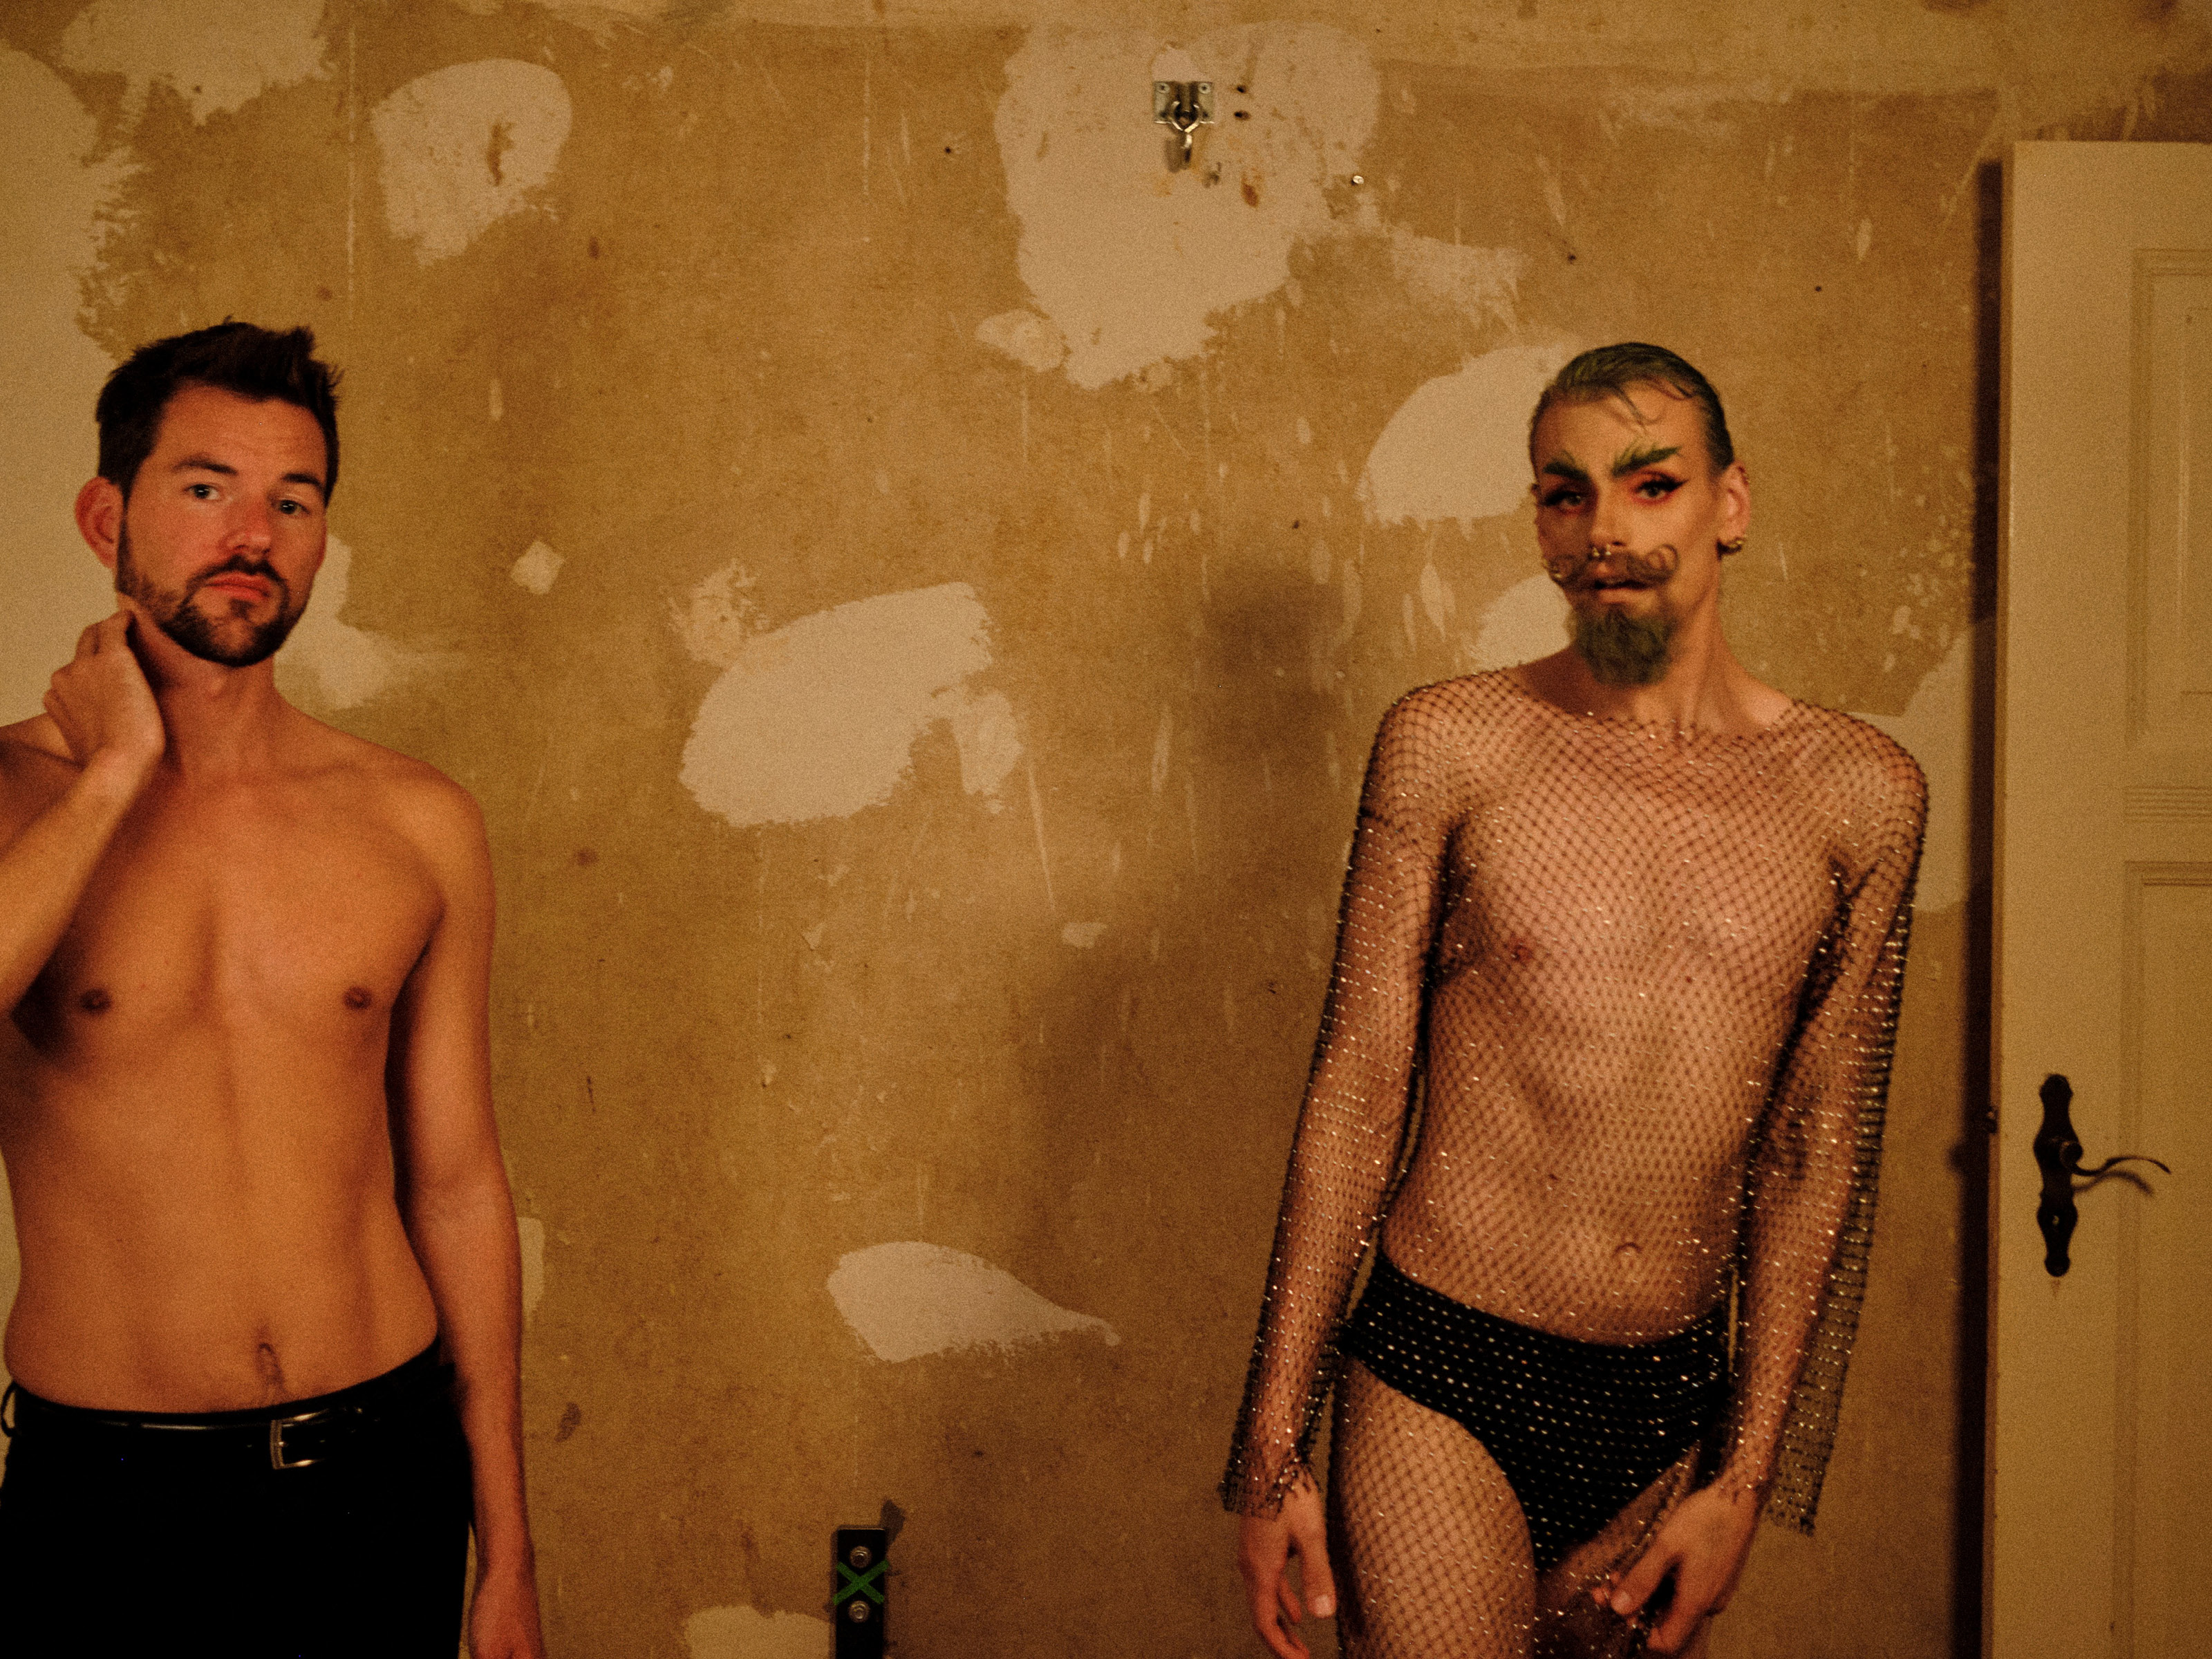 A young man with a bare torso and short brow hair and a short beard with black pants stands in front of an unrenovated wall. Next to him is another young man in black briefs. He is wearing a net dress with fake diamonds. He is wearing intense, dark Make-up and has his beard twirled upwards. His hair is tightly gelled back and his eyebrows are strikingly highlighted.